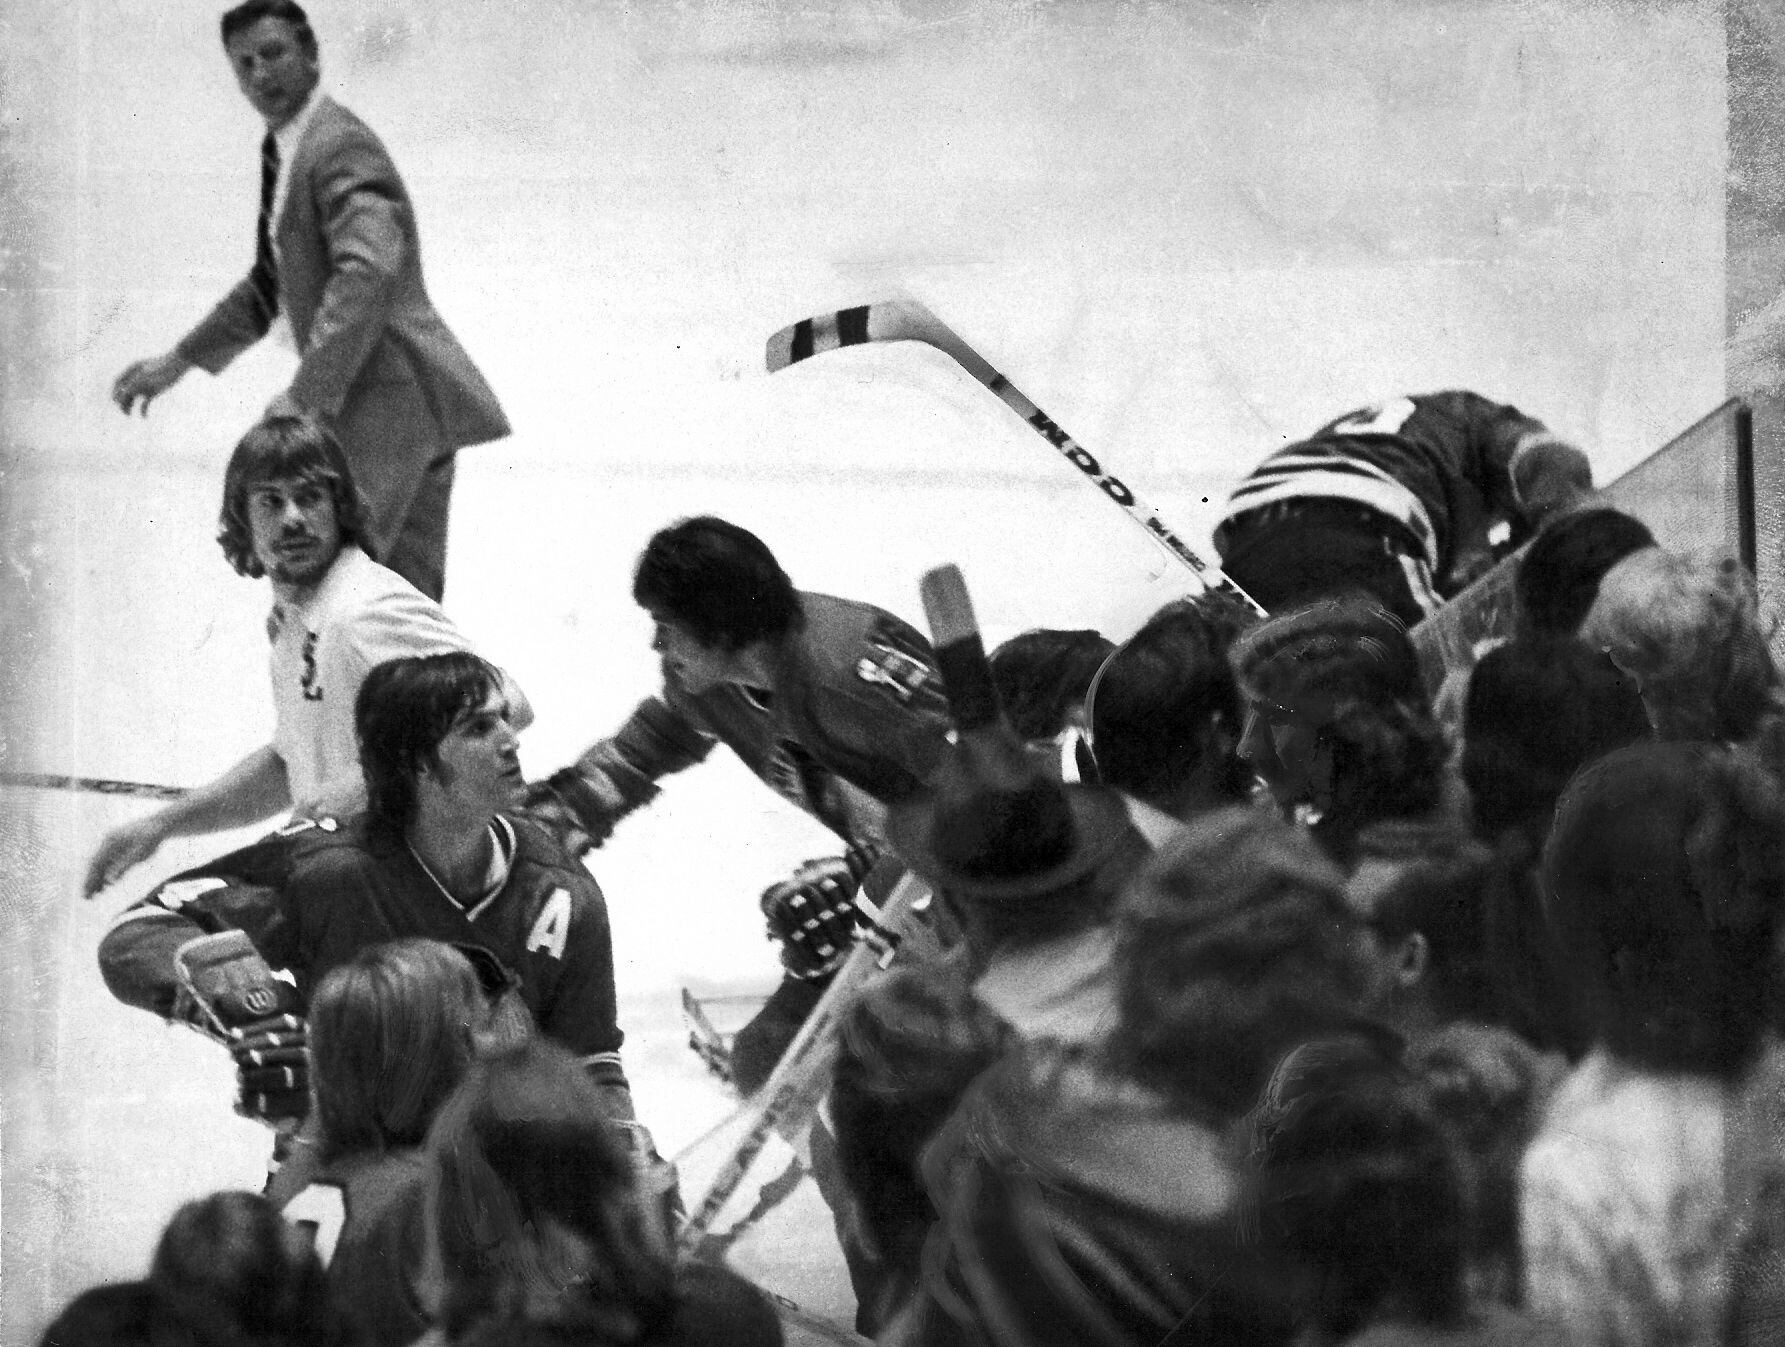 (Brian Acord) Opposing players get into a fight with fans at the Salt Palace during a Salt Lake Golden Eagles game in April of 1975.